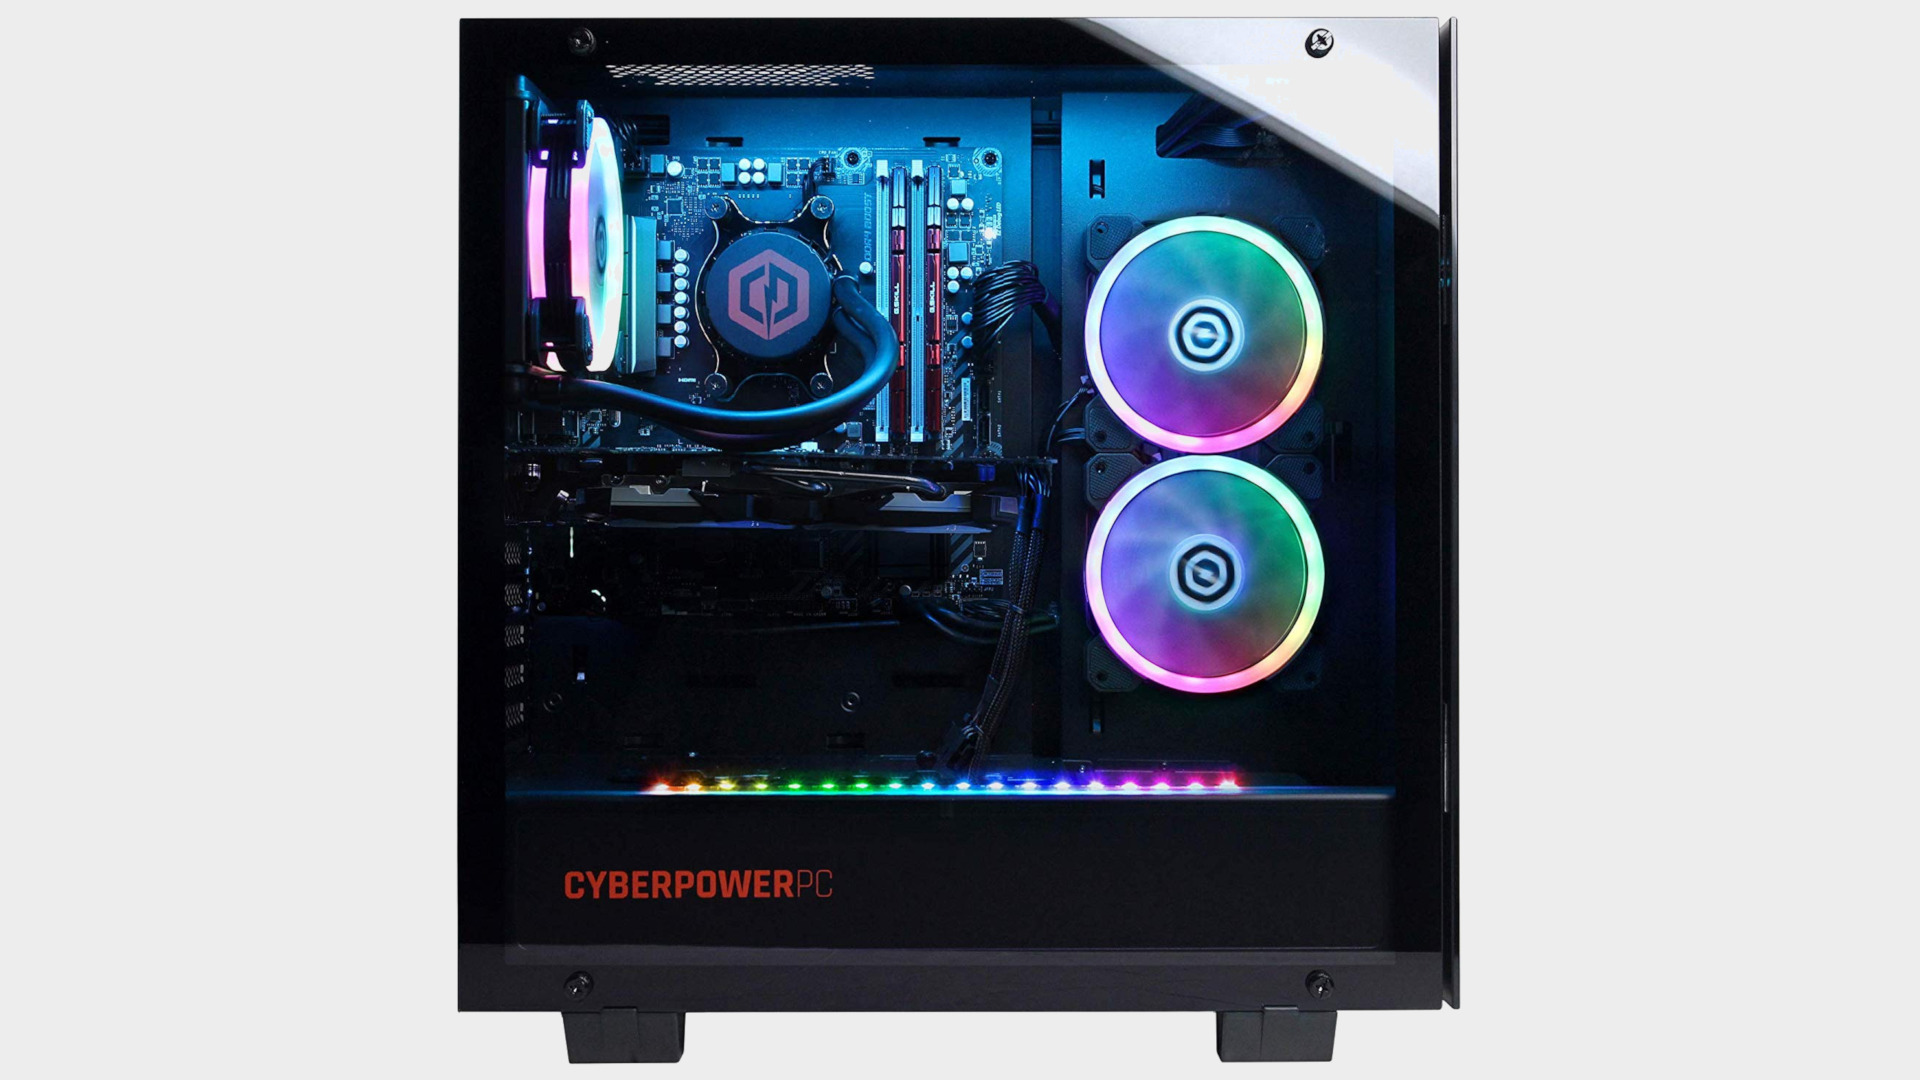 CyberpowerPC's Core i9 desktop with an RTX 2070 Super is down to 